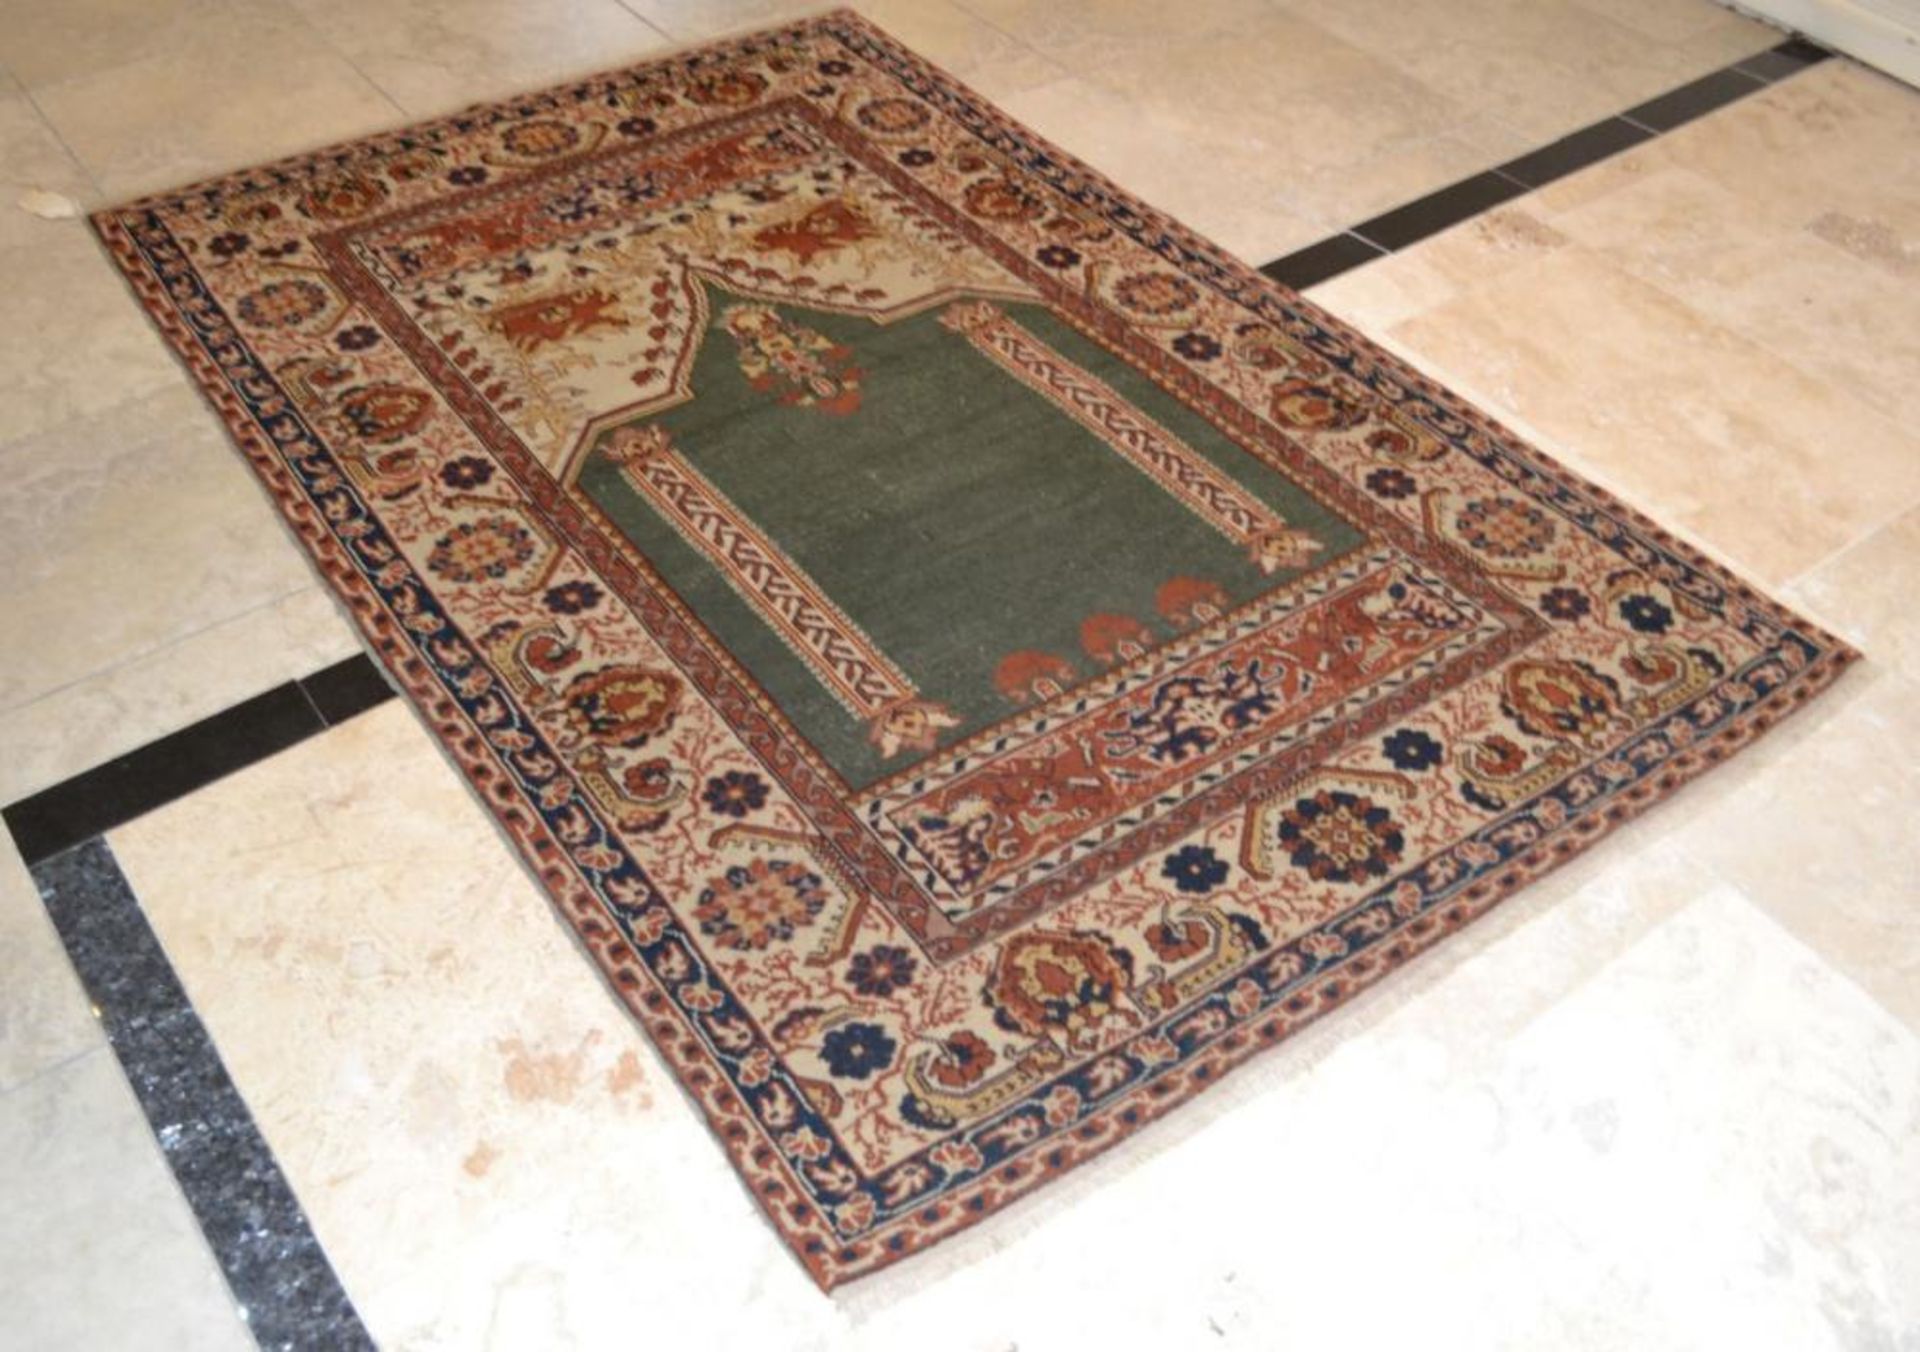 1 x 50 Year Old Turkish Prayer Rug - Vegetable Dyed Wool Foundation & Pile - Dimensions: 200x127cm - - Image 3 of 6